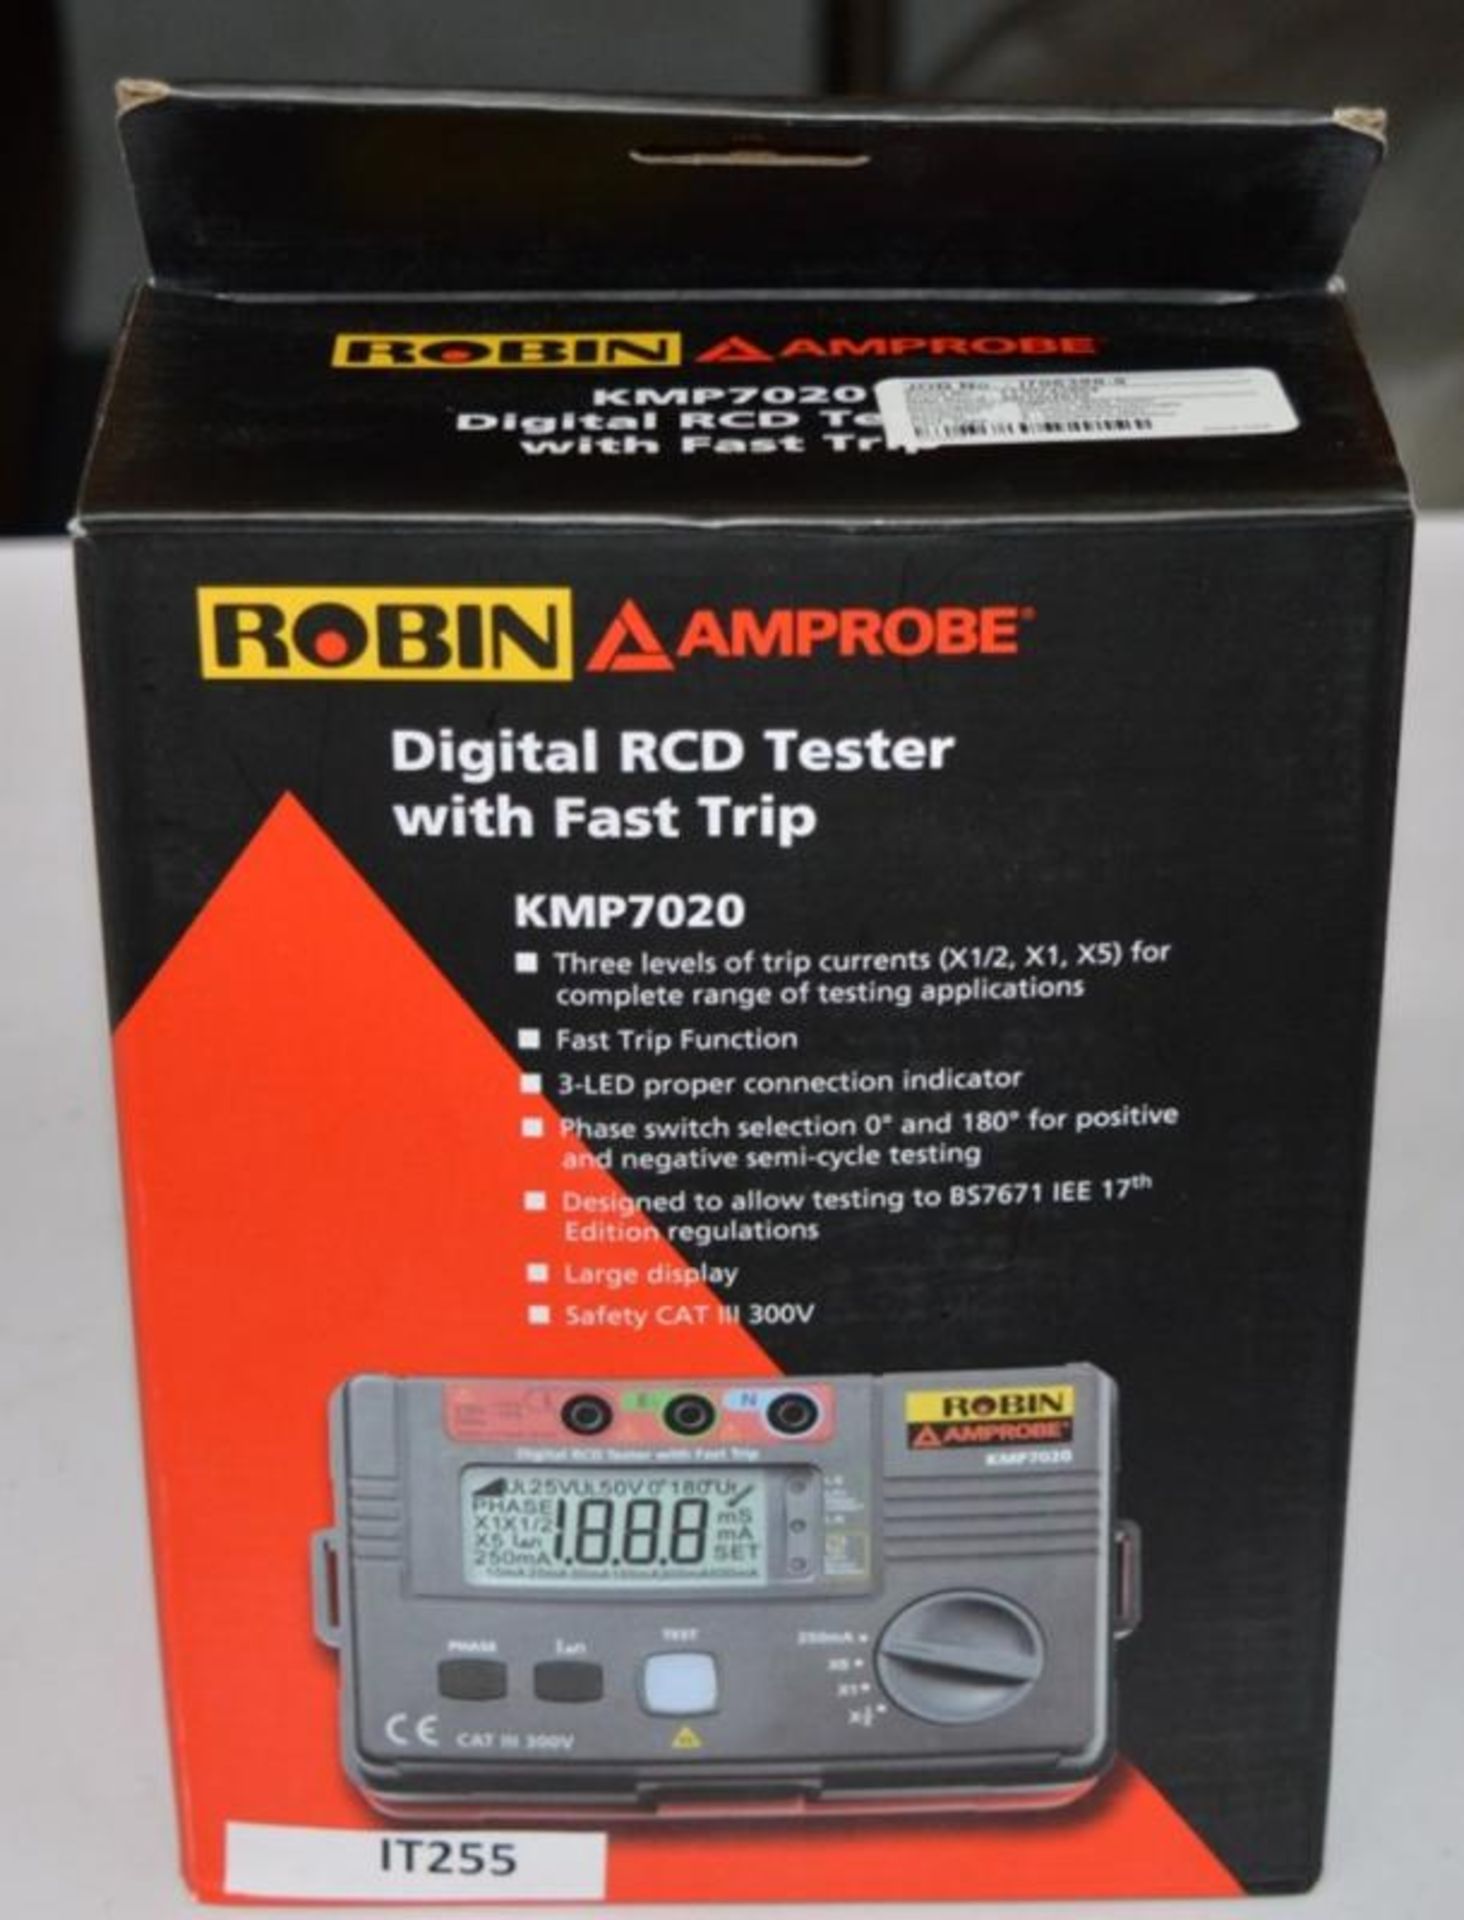 1 x Robin Amprobe Digital RCD Tester With Fast Trip - Model KMP7020 - Boxed With All Accessories - C